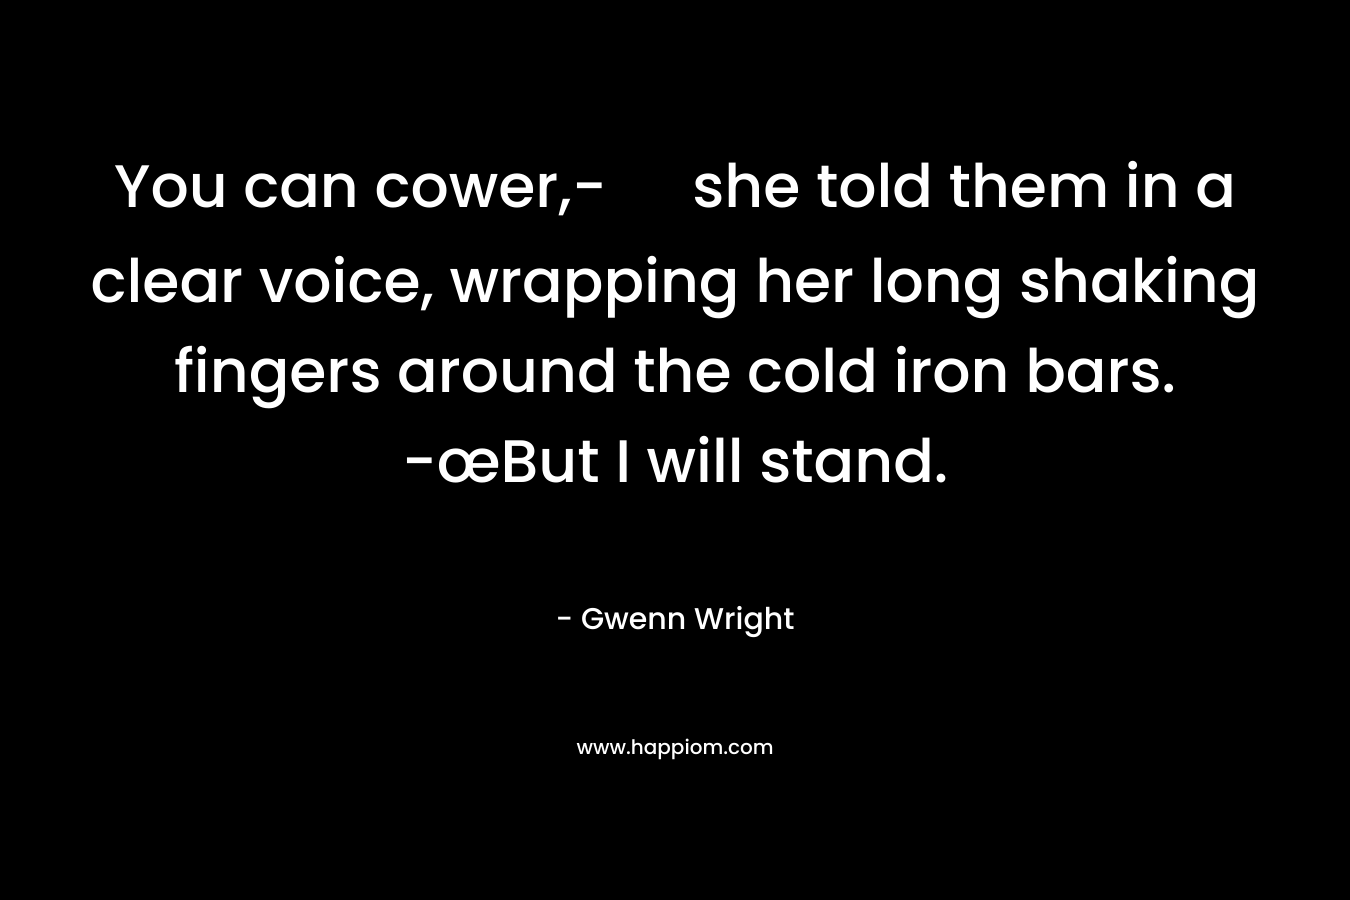 You can cower,- she told them in a clear voice, wrapping her long shaking fingers around the cold iron bars. -œBut I will stand. – Gwenn Wright